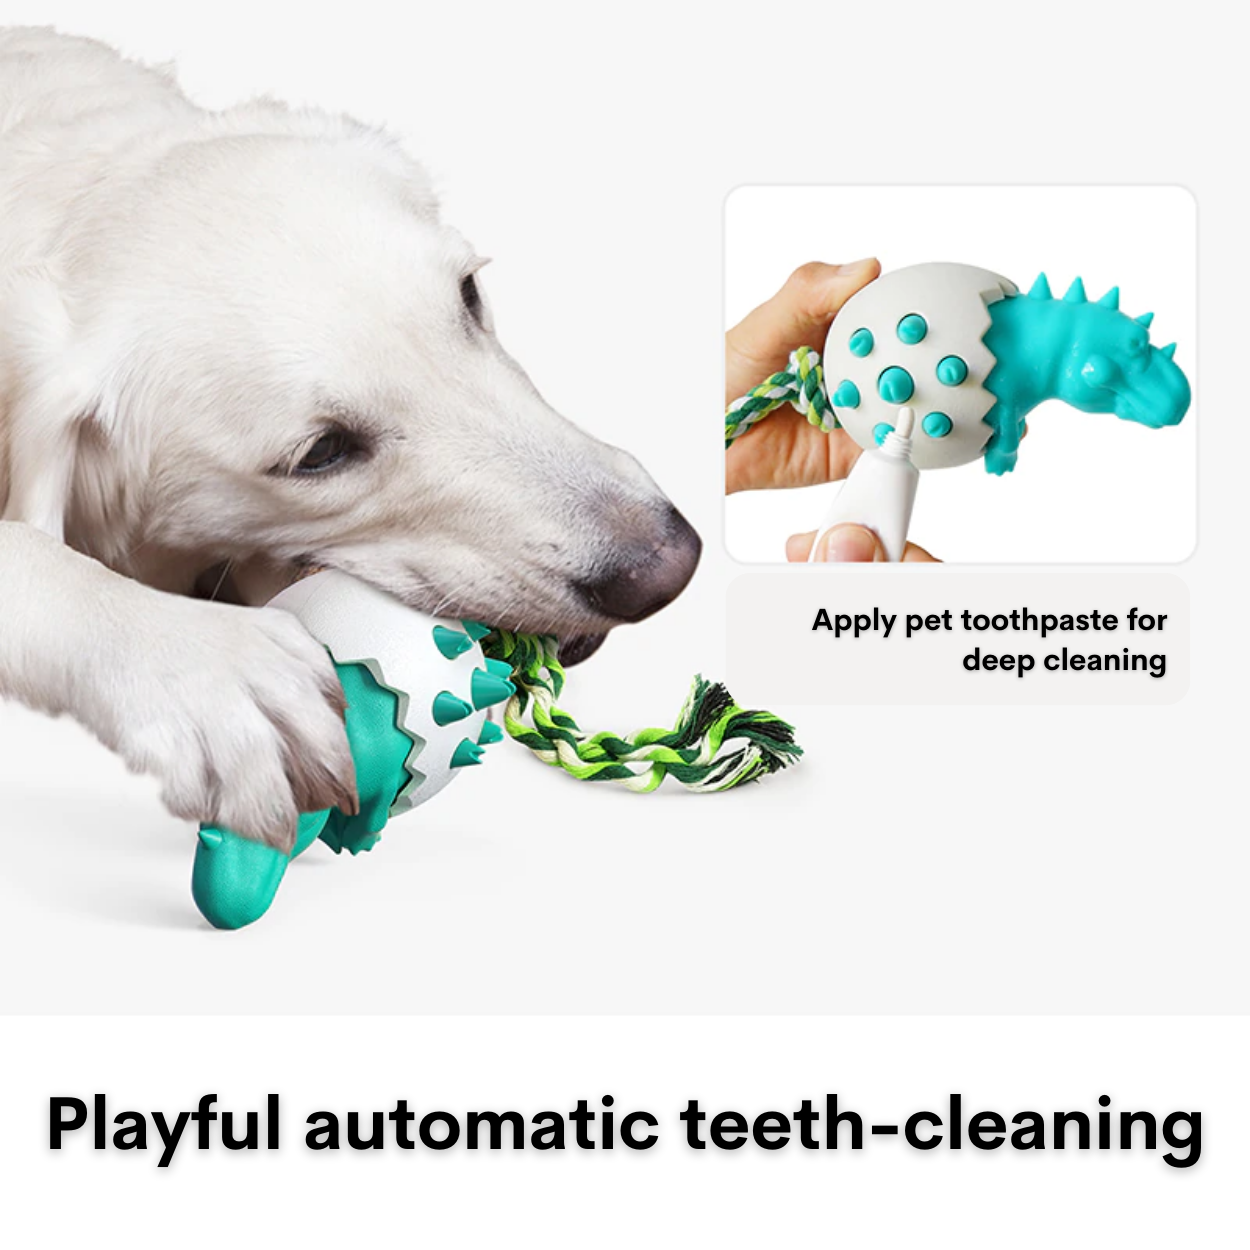 The Pawfect Teeth Toy